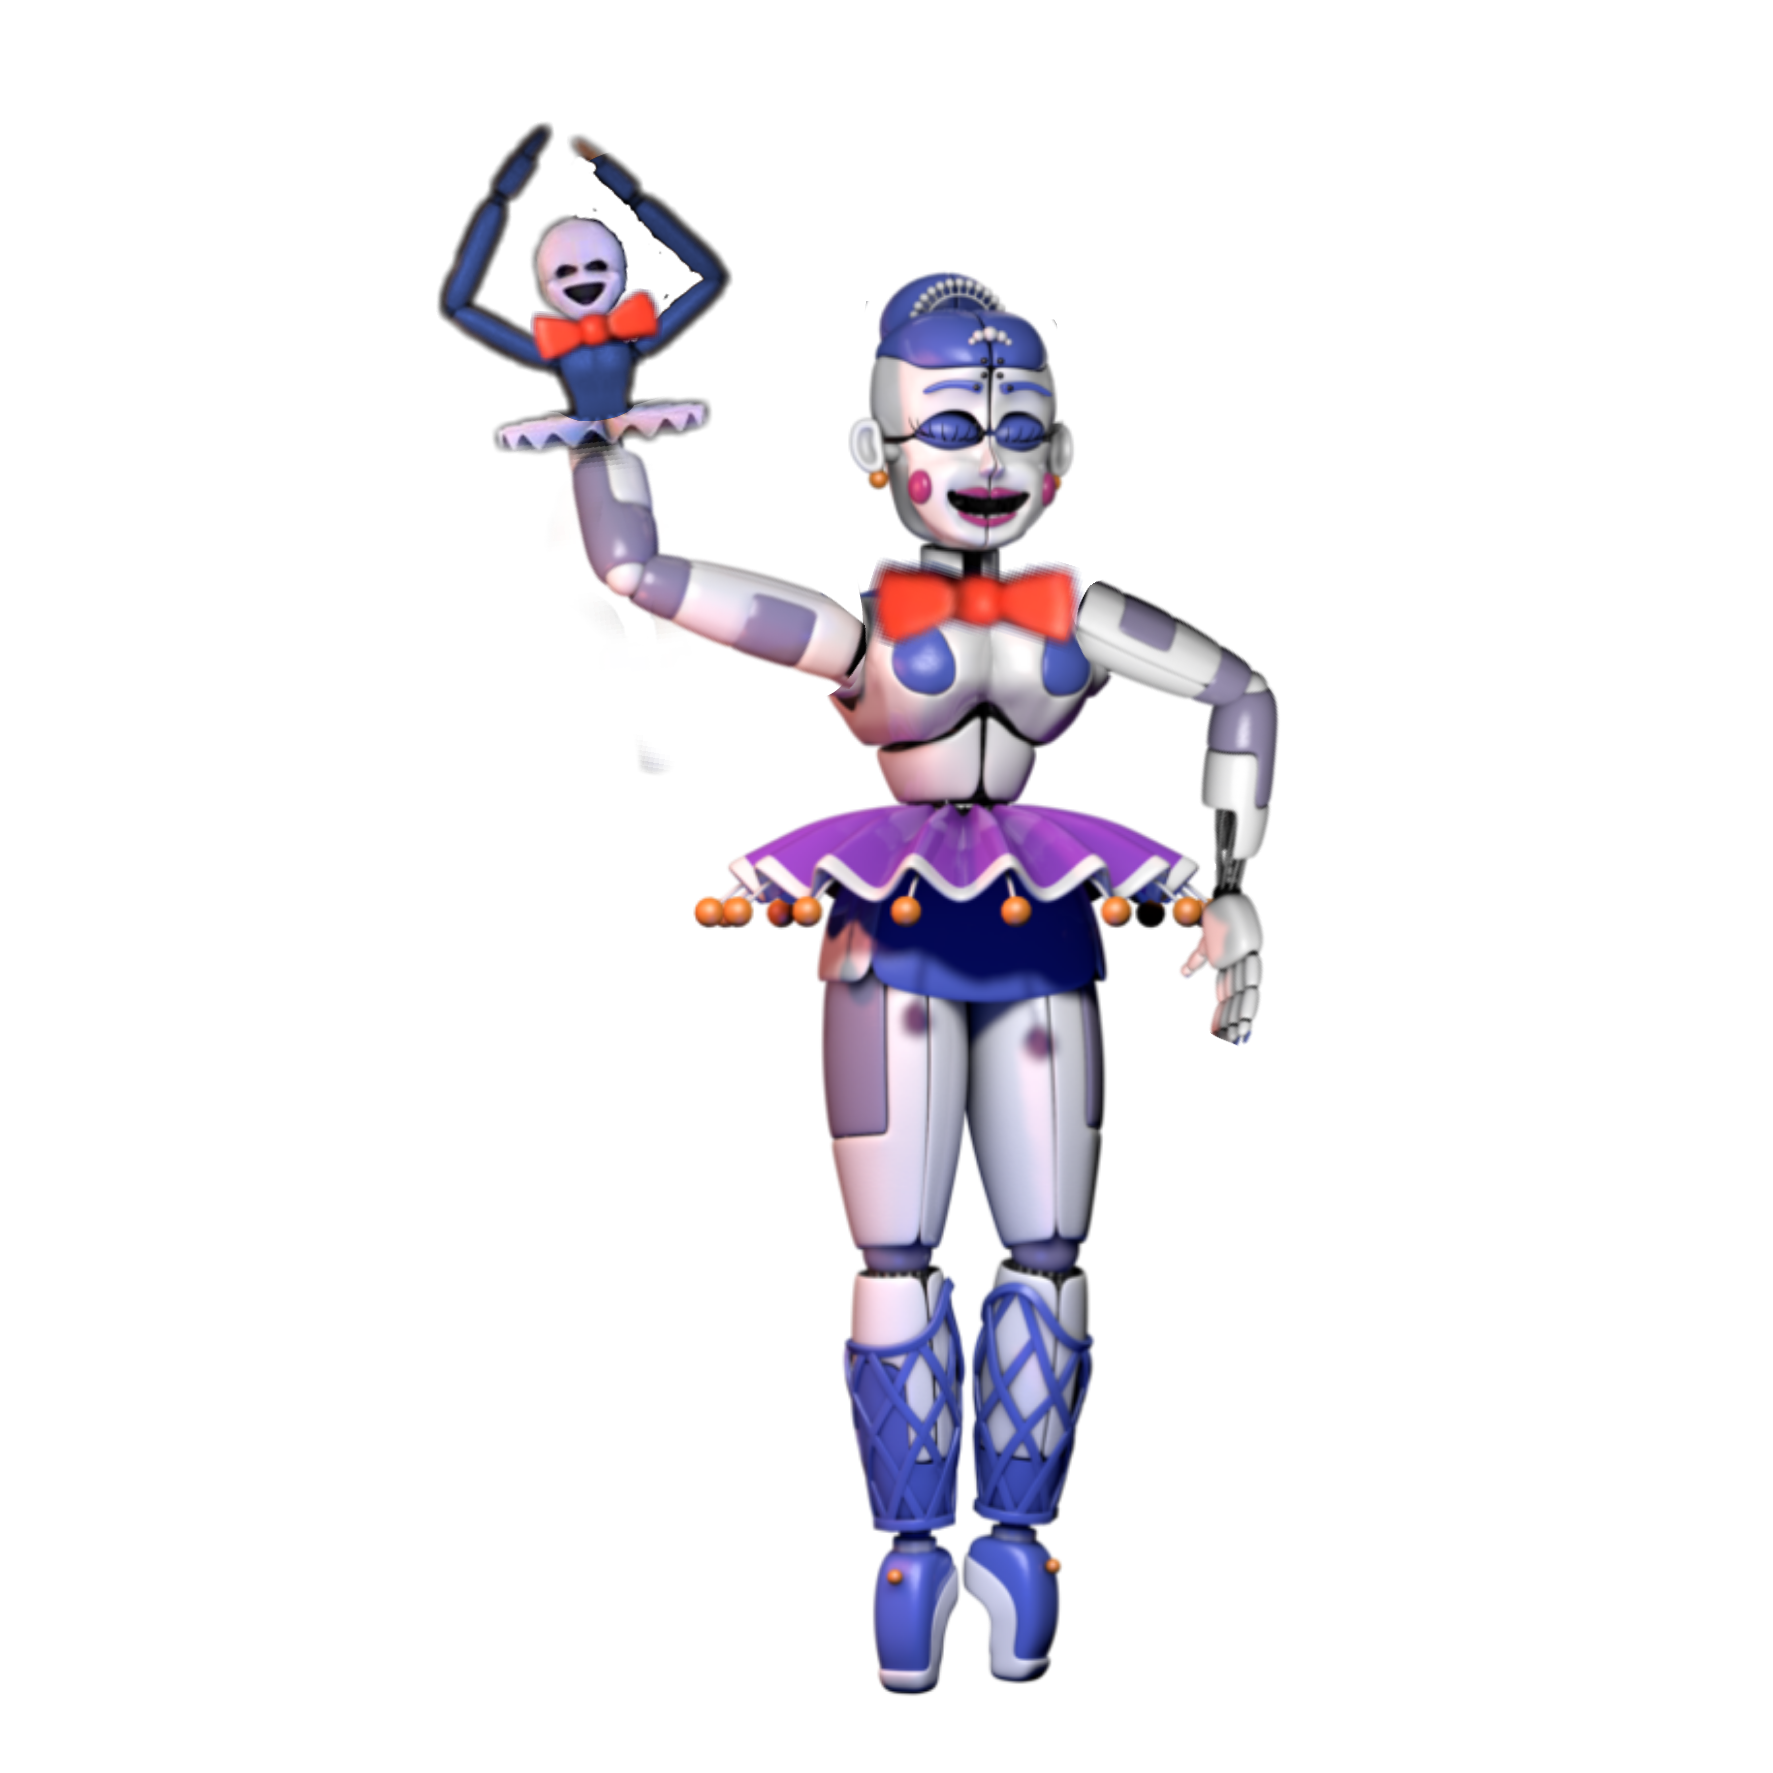 This visual is about funtime ballora freetoedit #funtime #ballora.